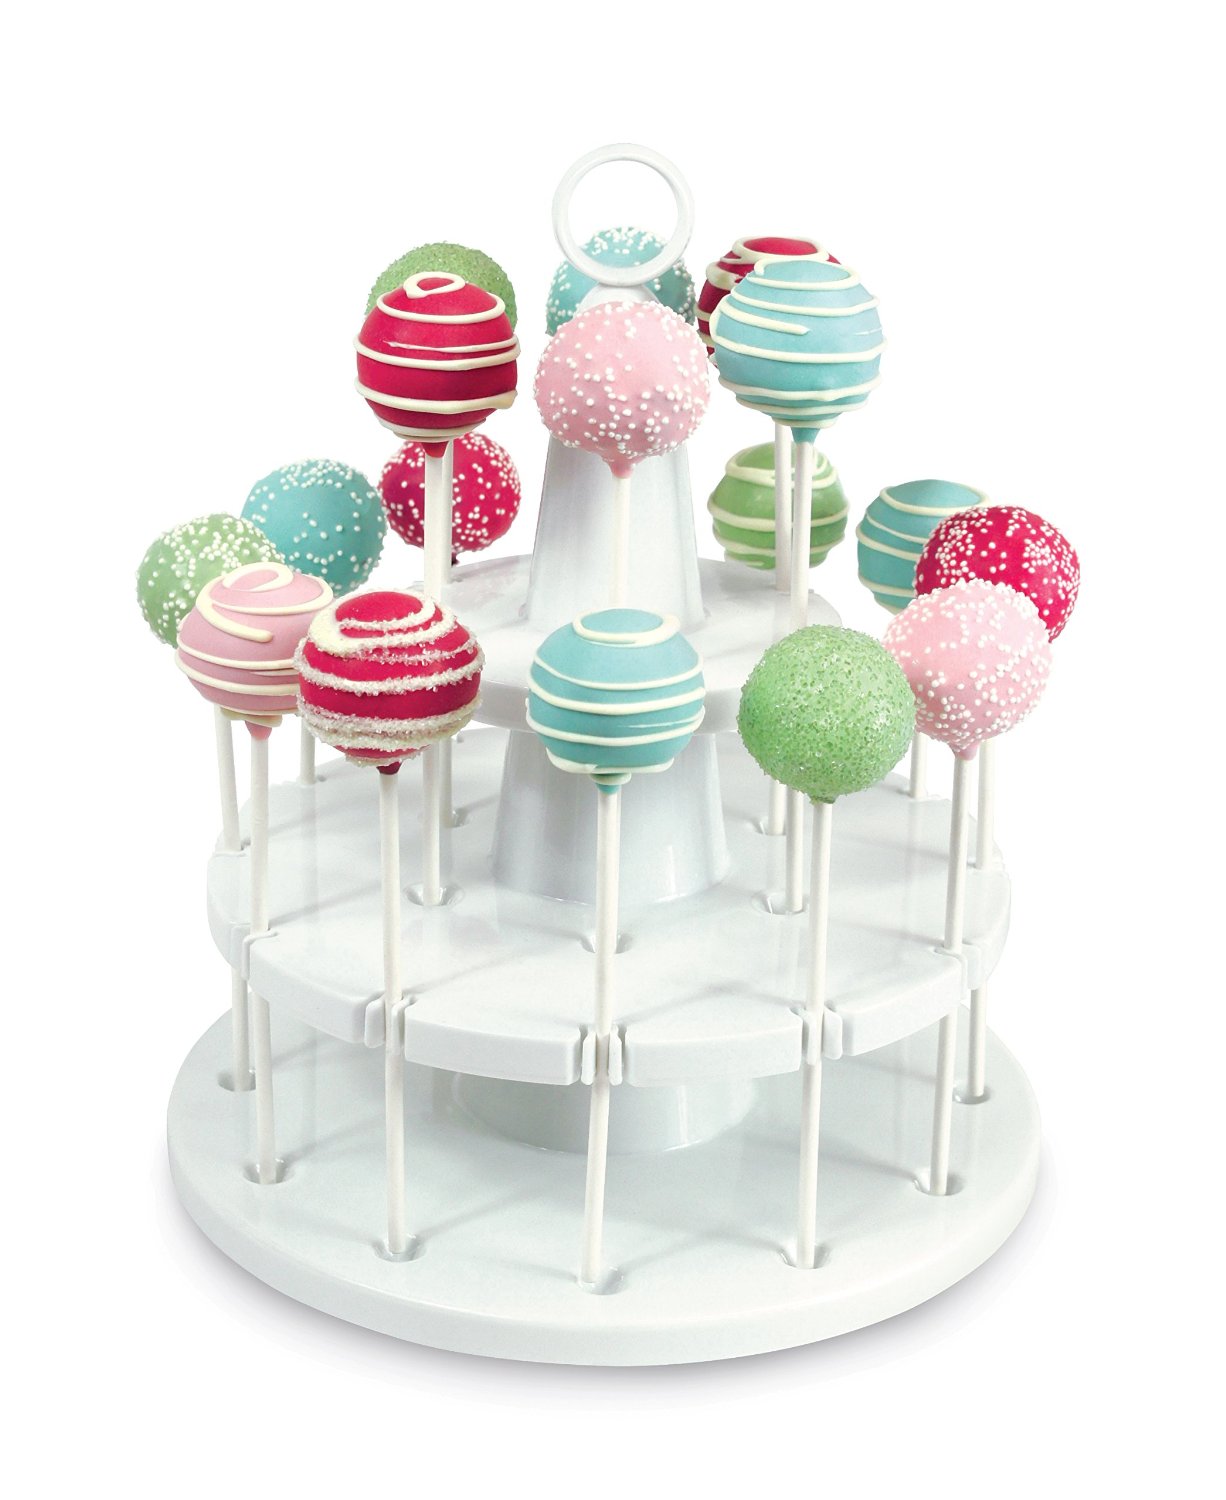 Bakelicious Cake Pops Stand - 18 ct - Cake Connection